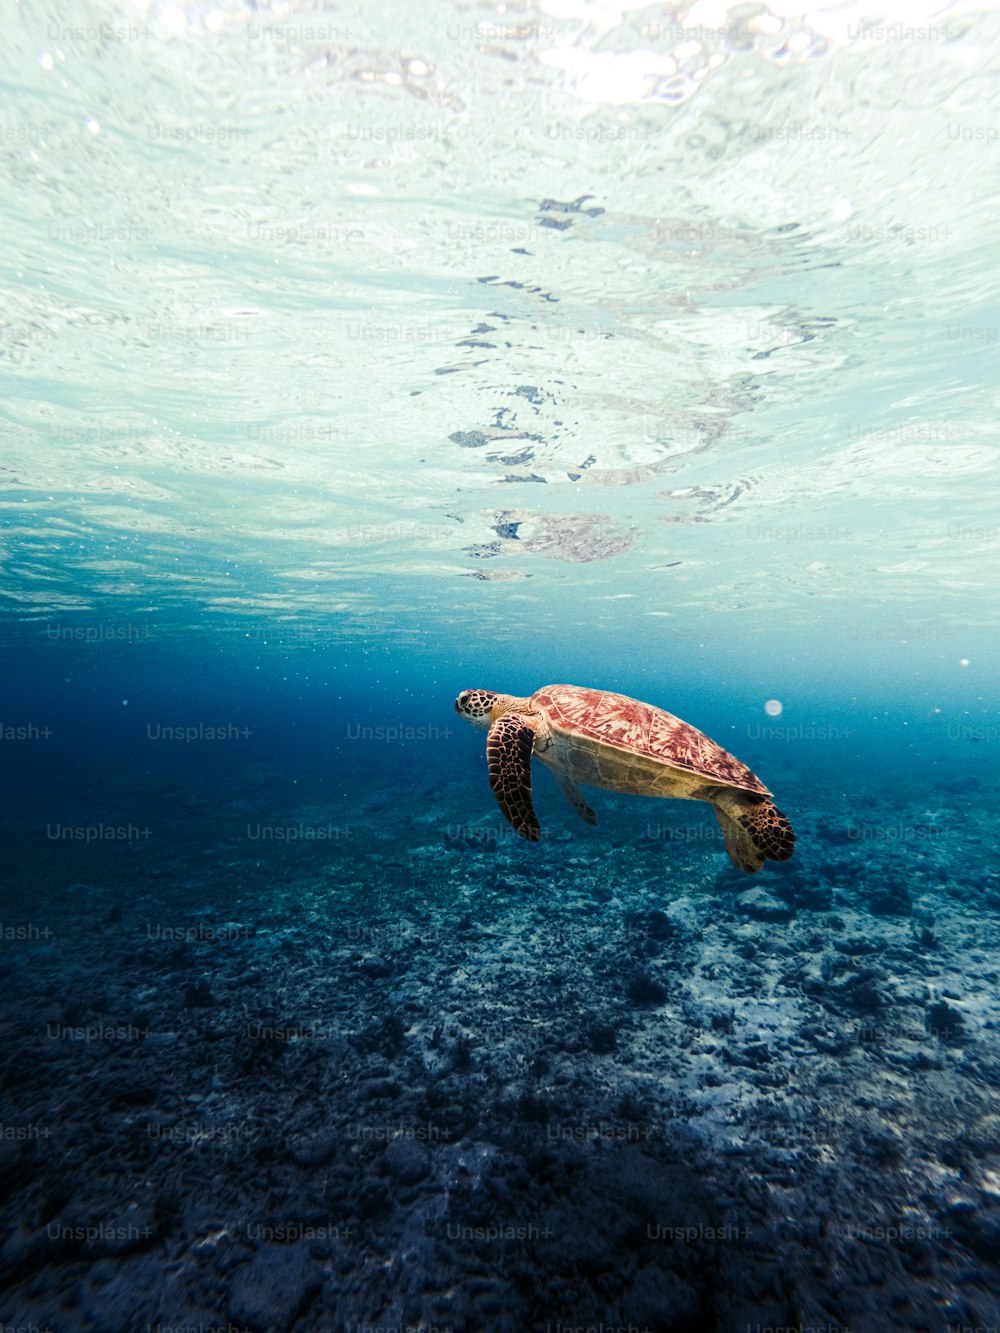 Ocean Animals Pictures | Download Free Images on Unsplash